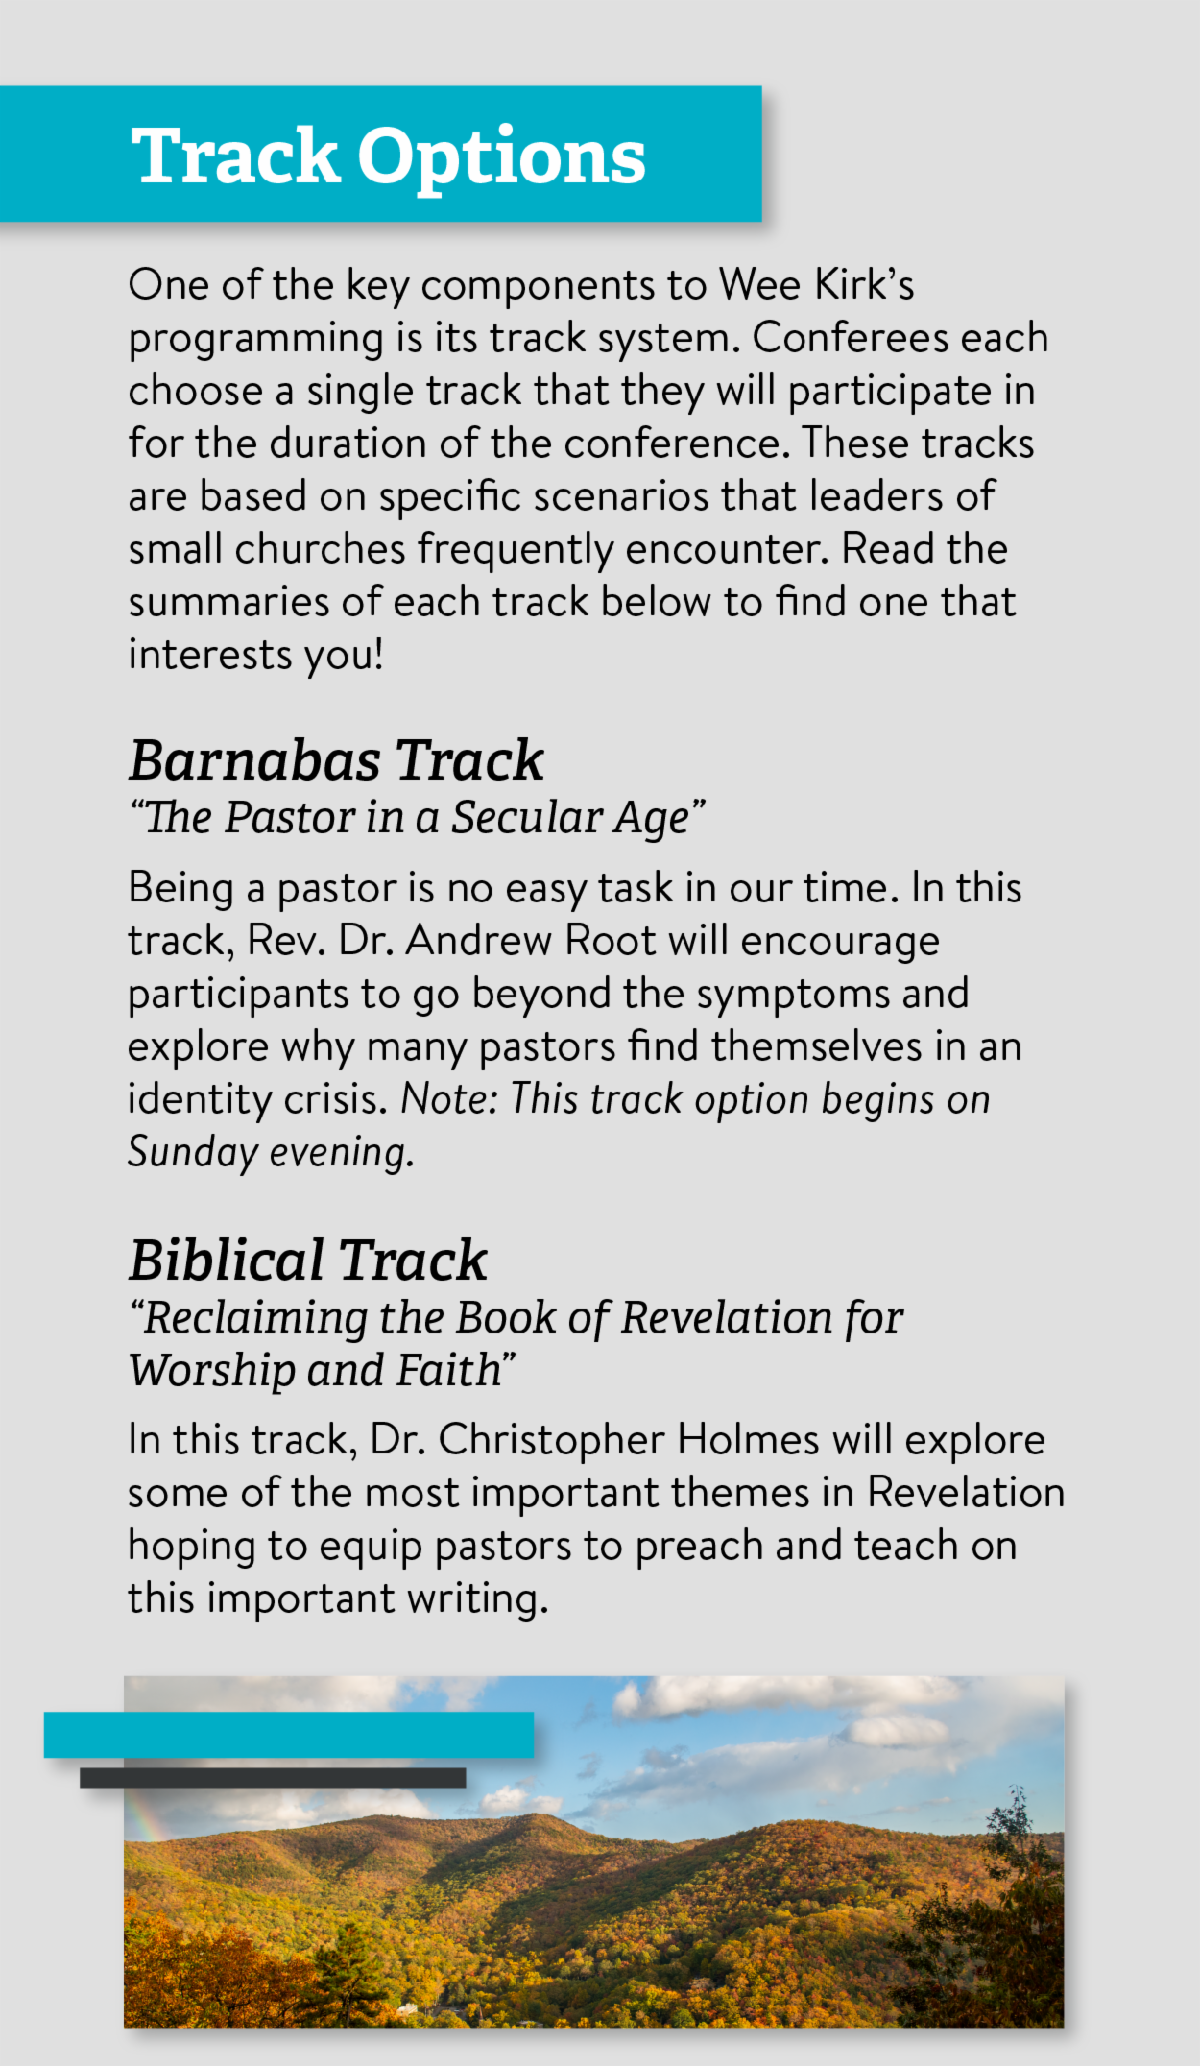 Track Options - One of the key components to Wee Kirk’s programming is its track system. Conferees each choose a single track that they will participate in for the duration of the conference. These tracks are based on specific scenarios that leaders of small churches frequently encounter. Read the summaries of each track below to find one that interests you! Barnabas Track “The Pastor in a Secular Age” Being a pastor is no easy task in our time. In this track, Rev. Dr. Andrew Root will encourage participants to go beyond the symptoms and explore why many pastors find themselves in an identity crisis. Note: This track option begins on Sunday evening. Biblical Track “Reclaiming the Book of Revelation for Worship and Faith” In this track, Dr. Christopher Holmes will explore some of the most important themes in Revelation hoping to equip pastors to preach and teach on this important writing.